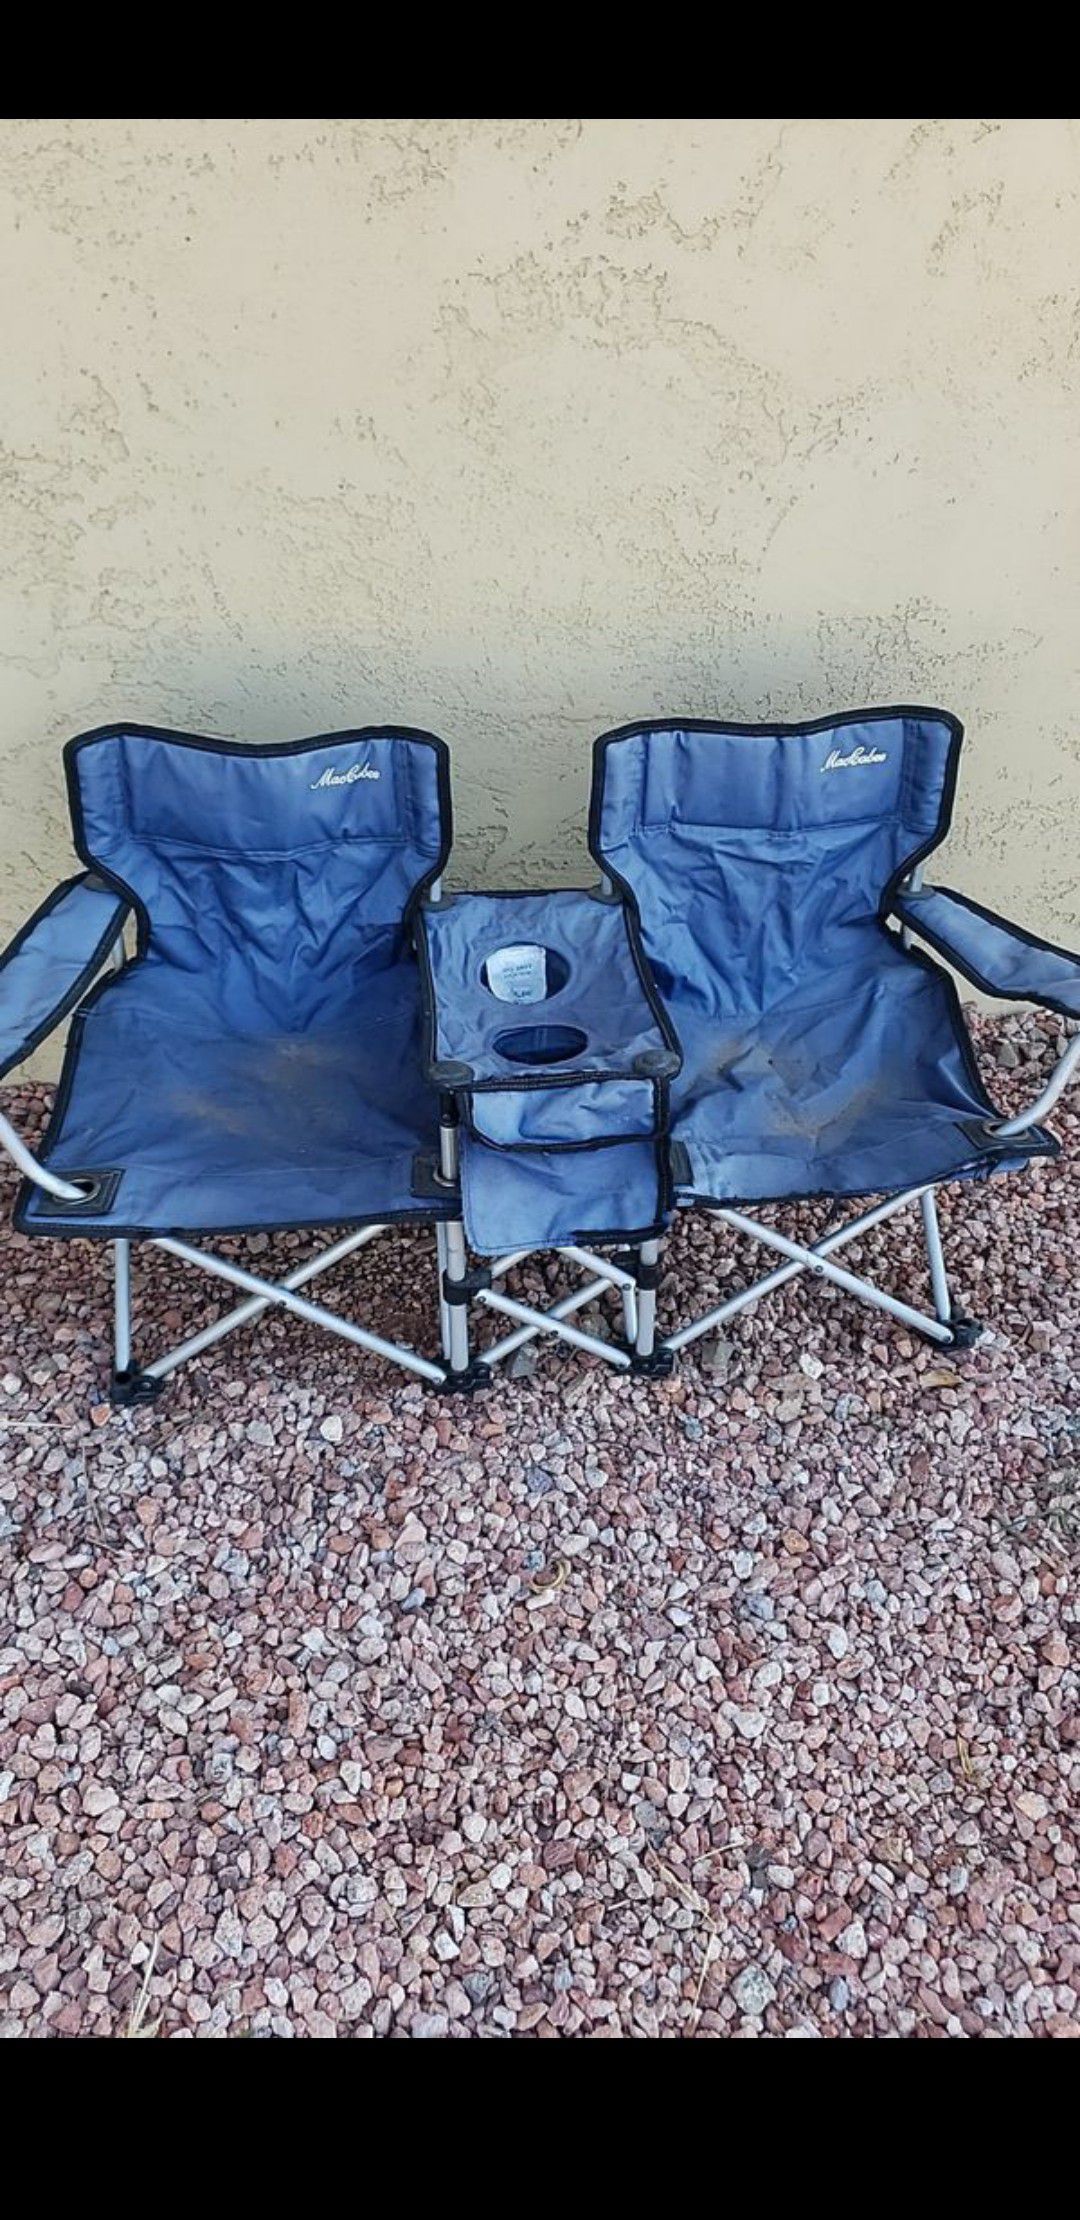 Kids double chair for games or camping